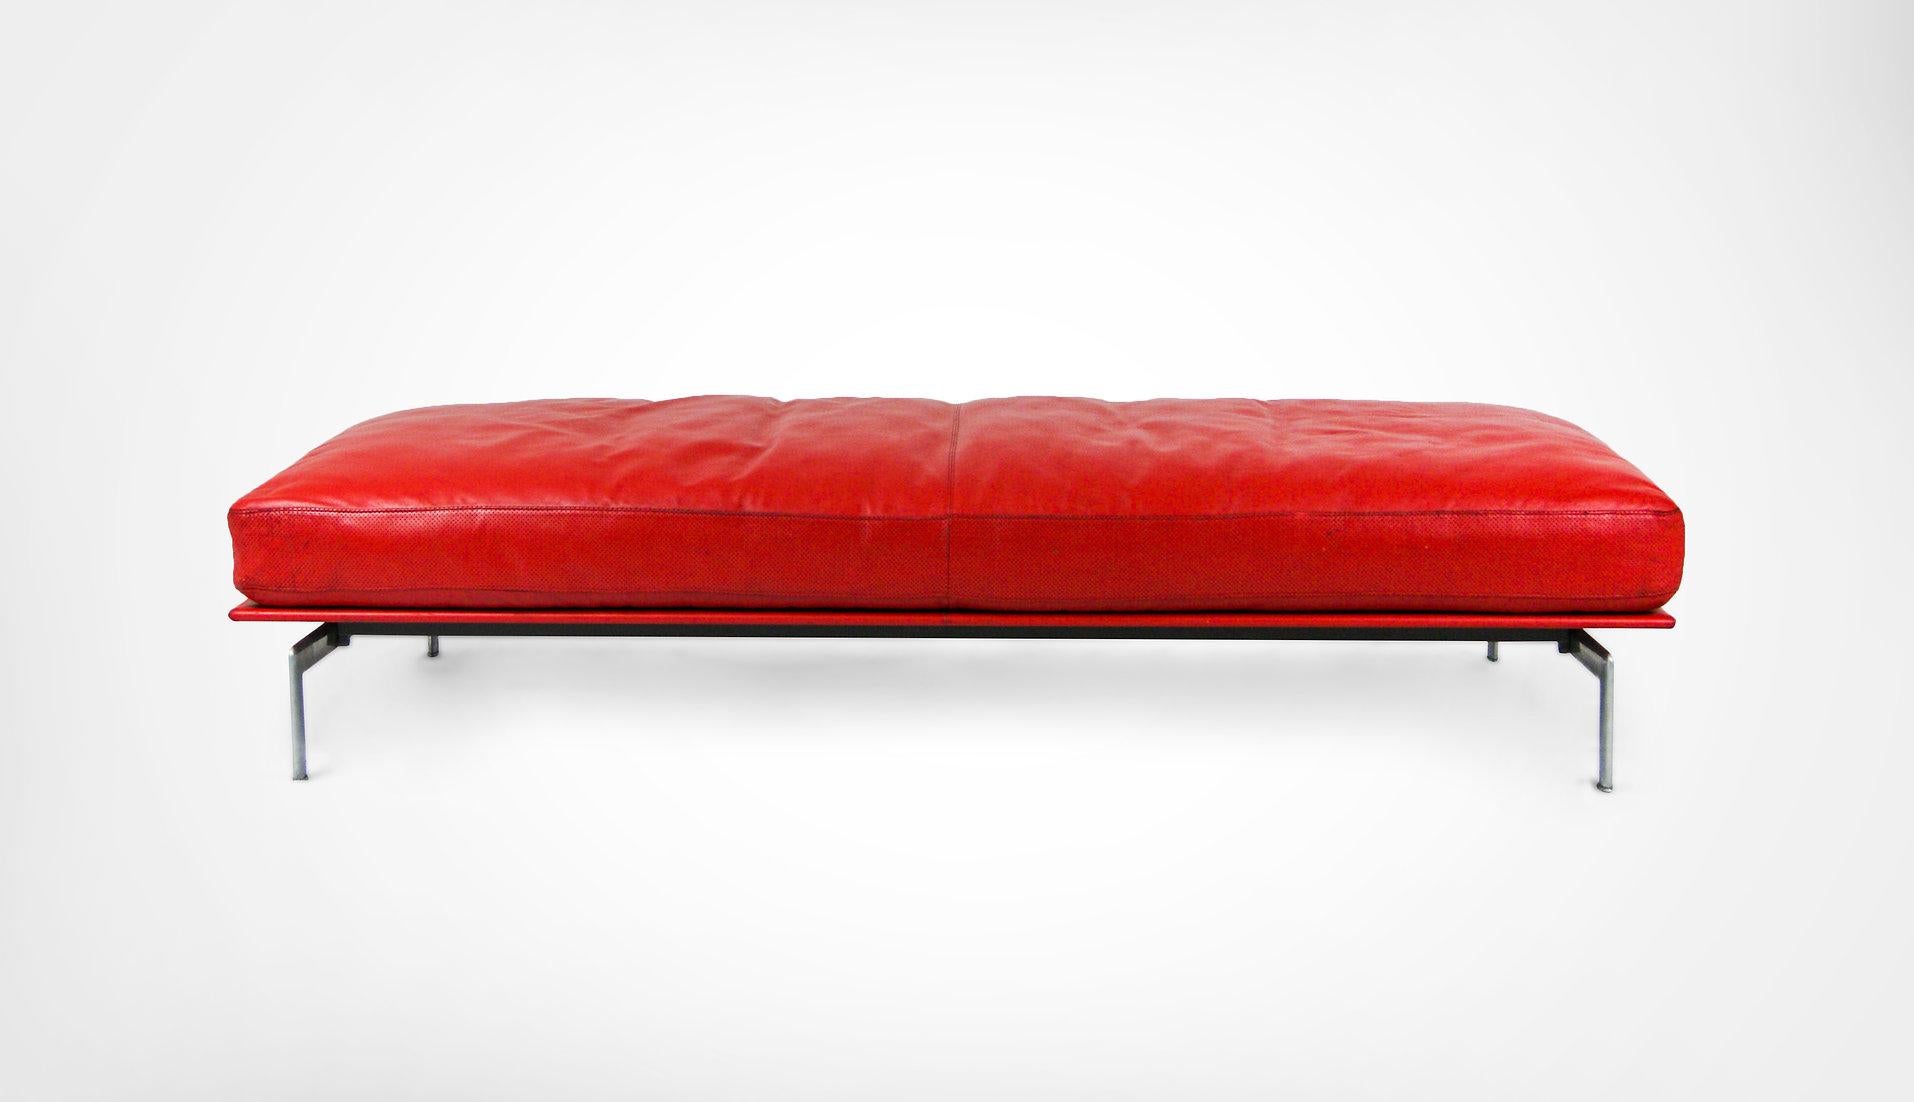 Pair of Diesis daybeds/ benches by B&B Italia.
Designed by Paolo Nava and Antonio Citterio circa 1980s.
These pair dates back to 1988.
In supple red leather, resting on brushed steel frame.
An elegant and sophisticated sofa bench designed to